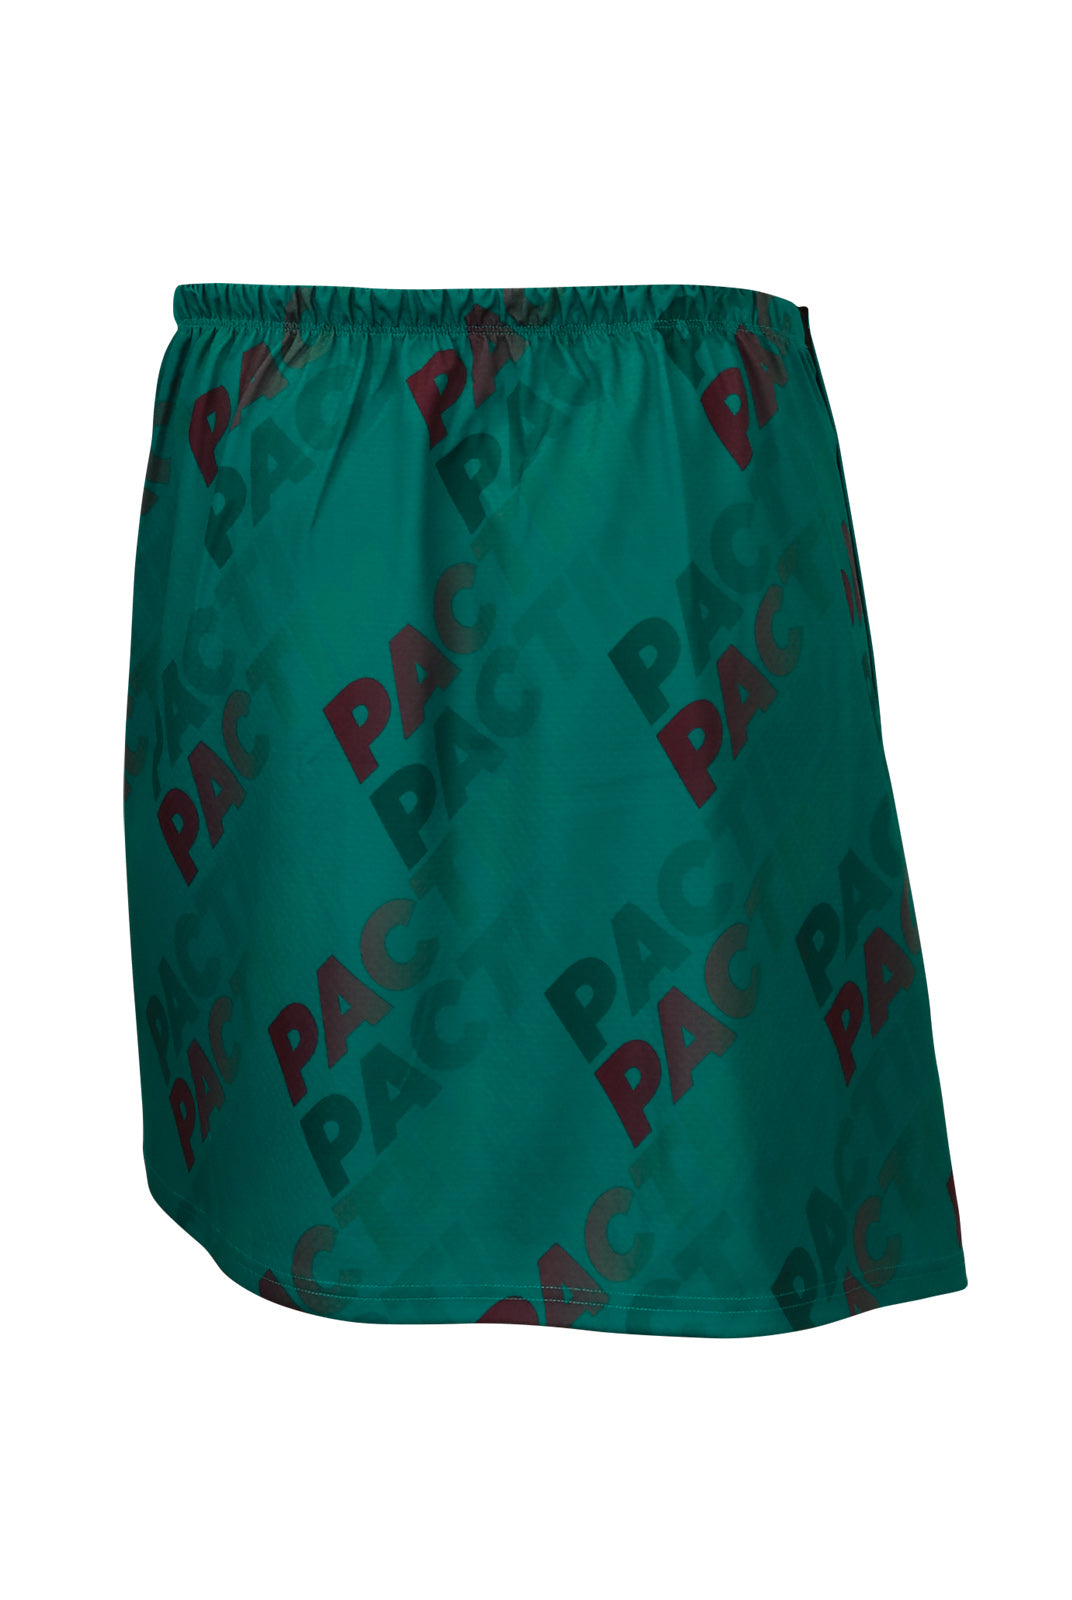 Teal Quick Release Cycling Changing Kilt - Back View